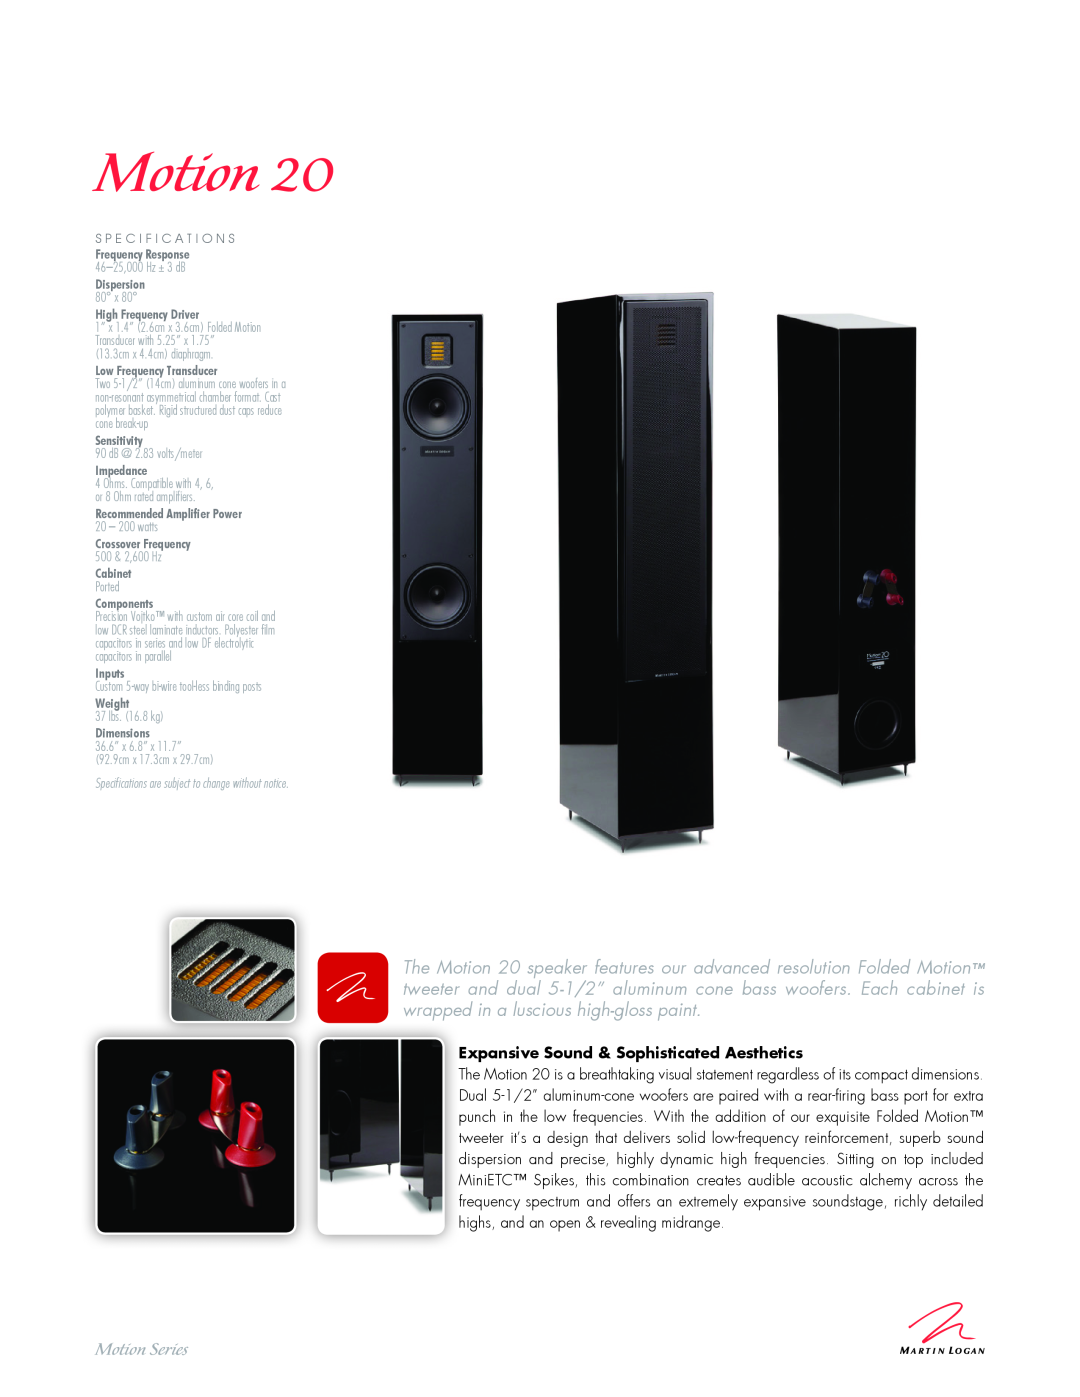 MartinLogan 20 specifications Motion Series, Expansive Sound & Sophisticated Aesthetics 